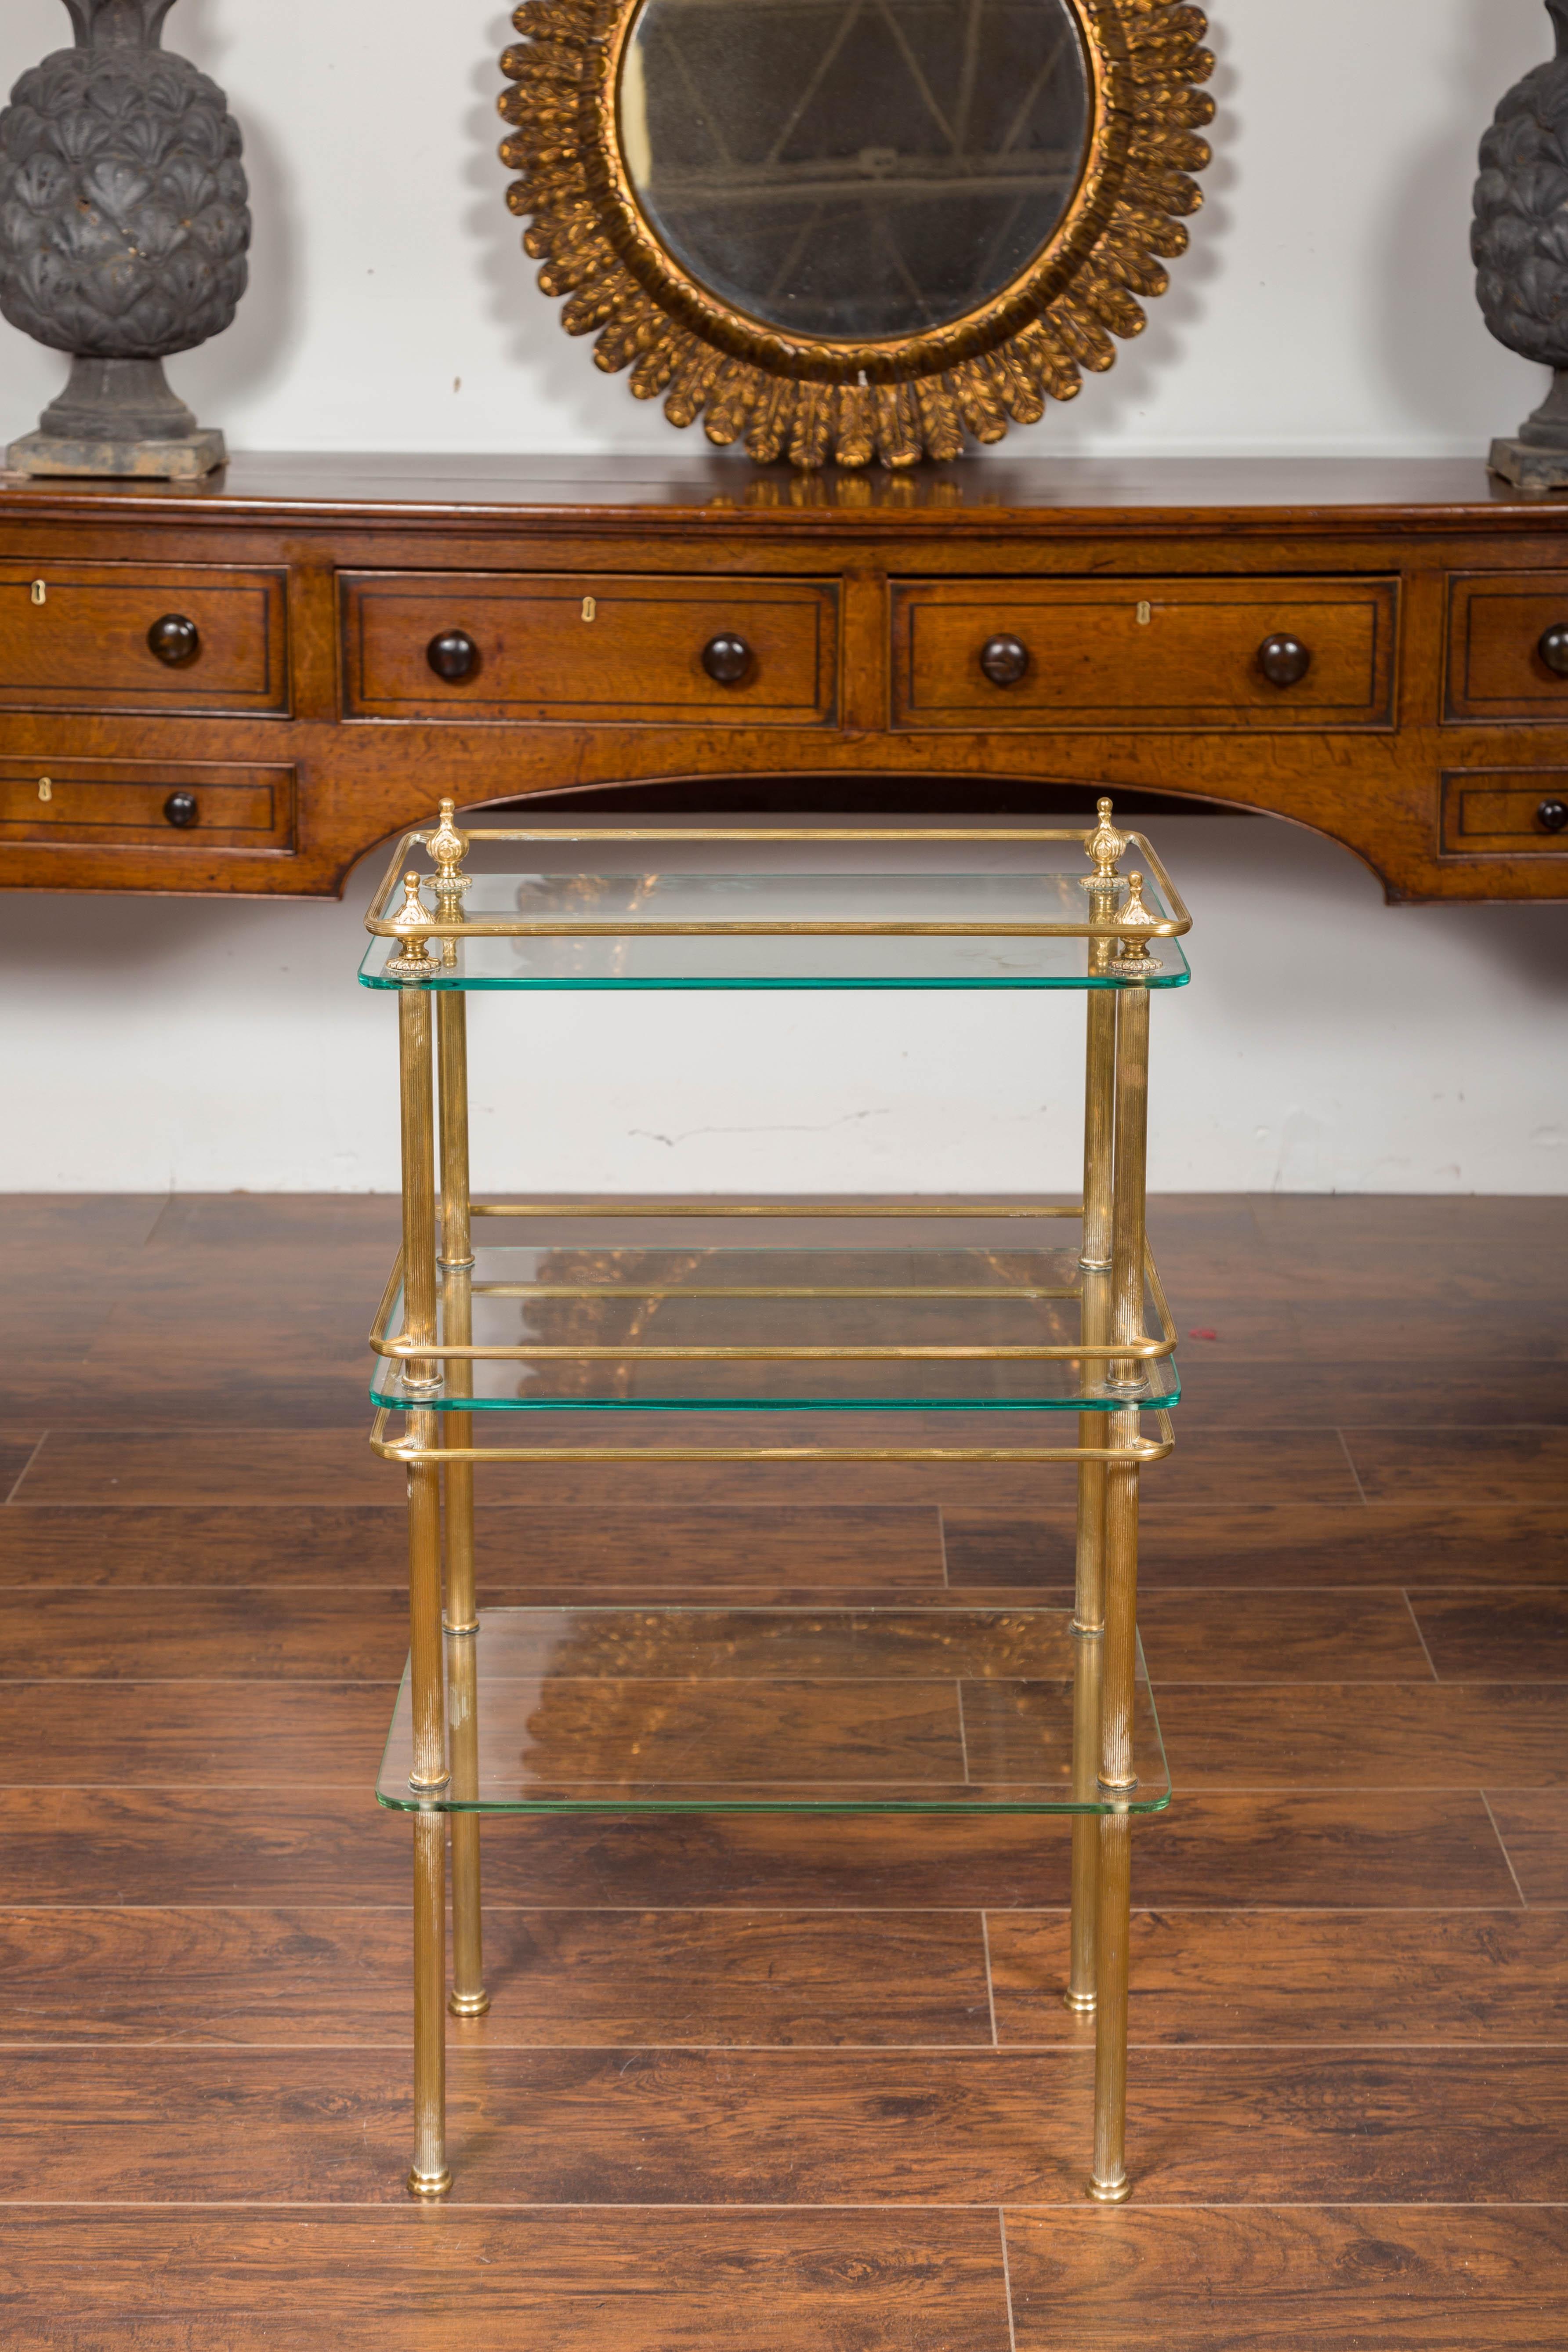 An Italian vintage tiered brass side table from the mid-20th century, with glass shelves and petite finials. Born in Italy during the midcentury period, this brass side table features three levels of glass shelves, secured by thin brass fluted